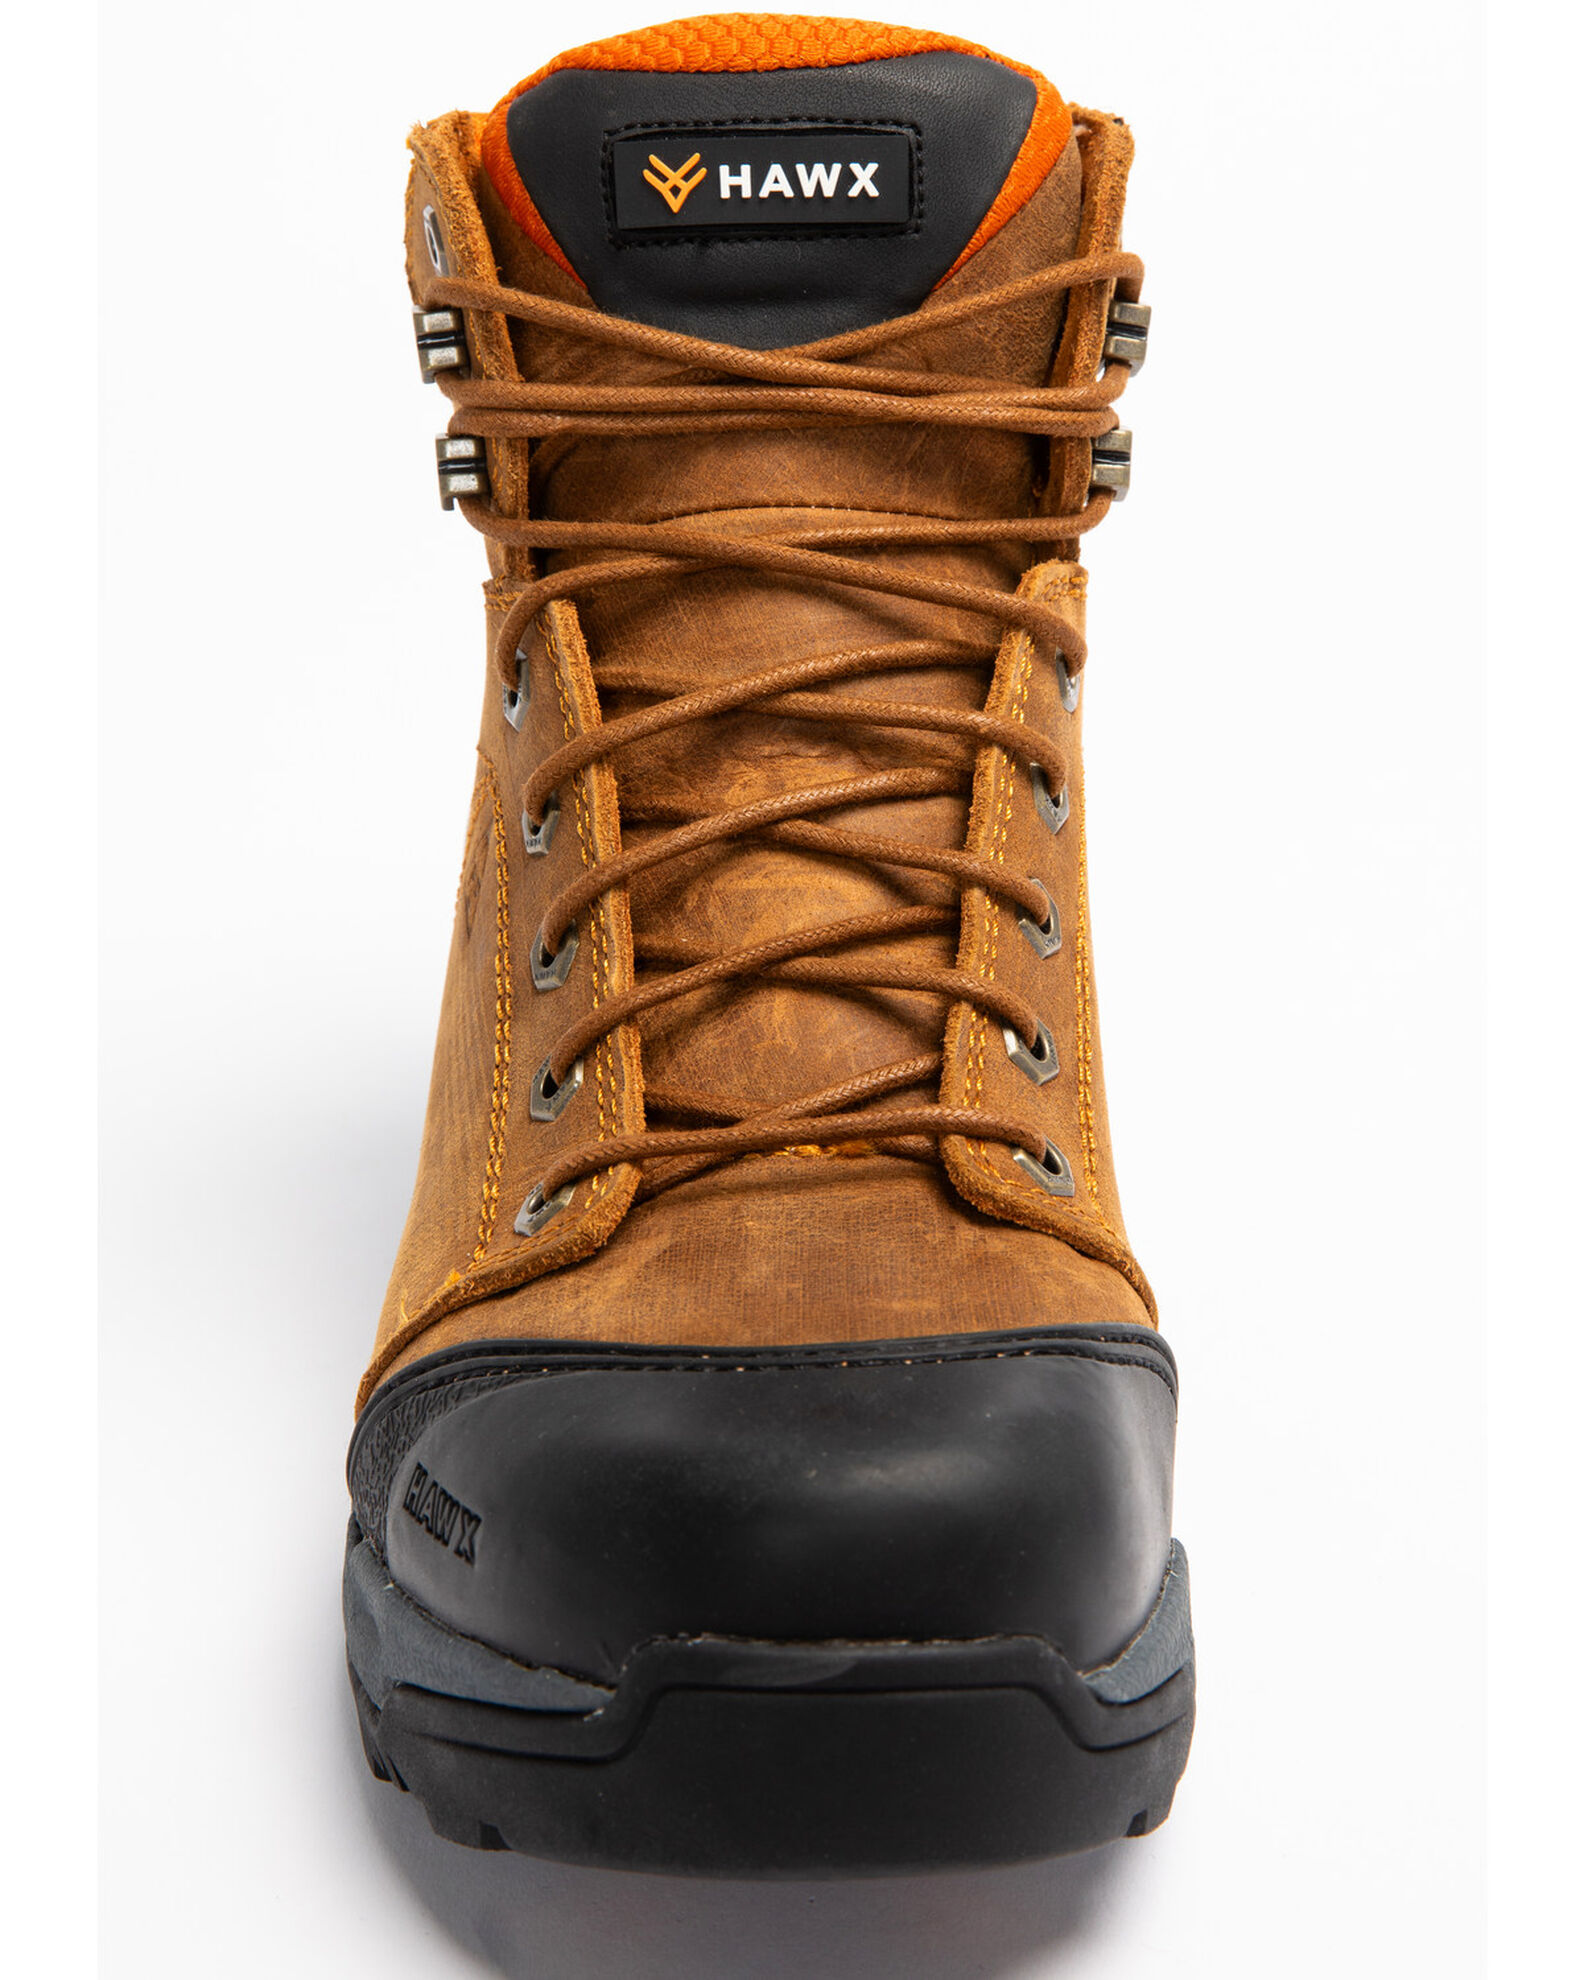 Hawx Men's Lace To Toe Hiker Boots - Round Toe